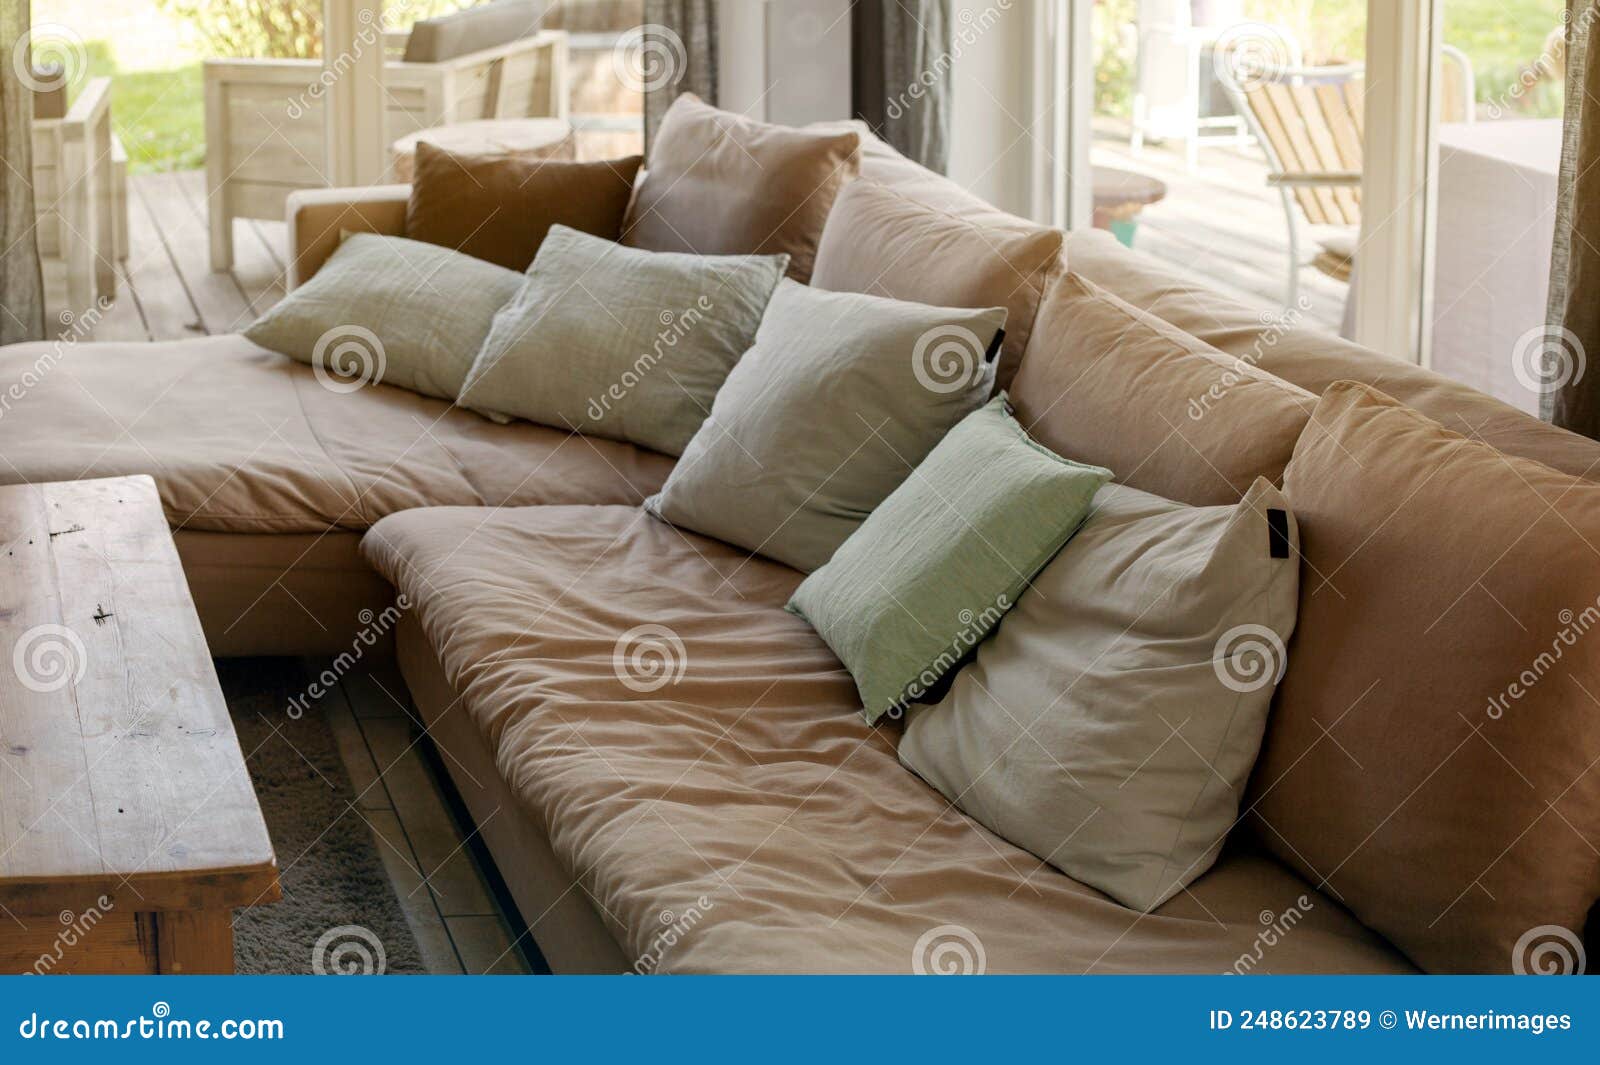 Big Sofa with Lots of Pillows in a Living Room Stock Image - Image